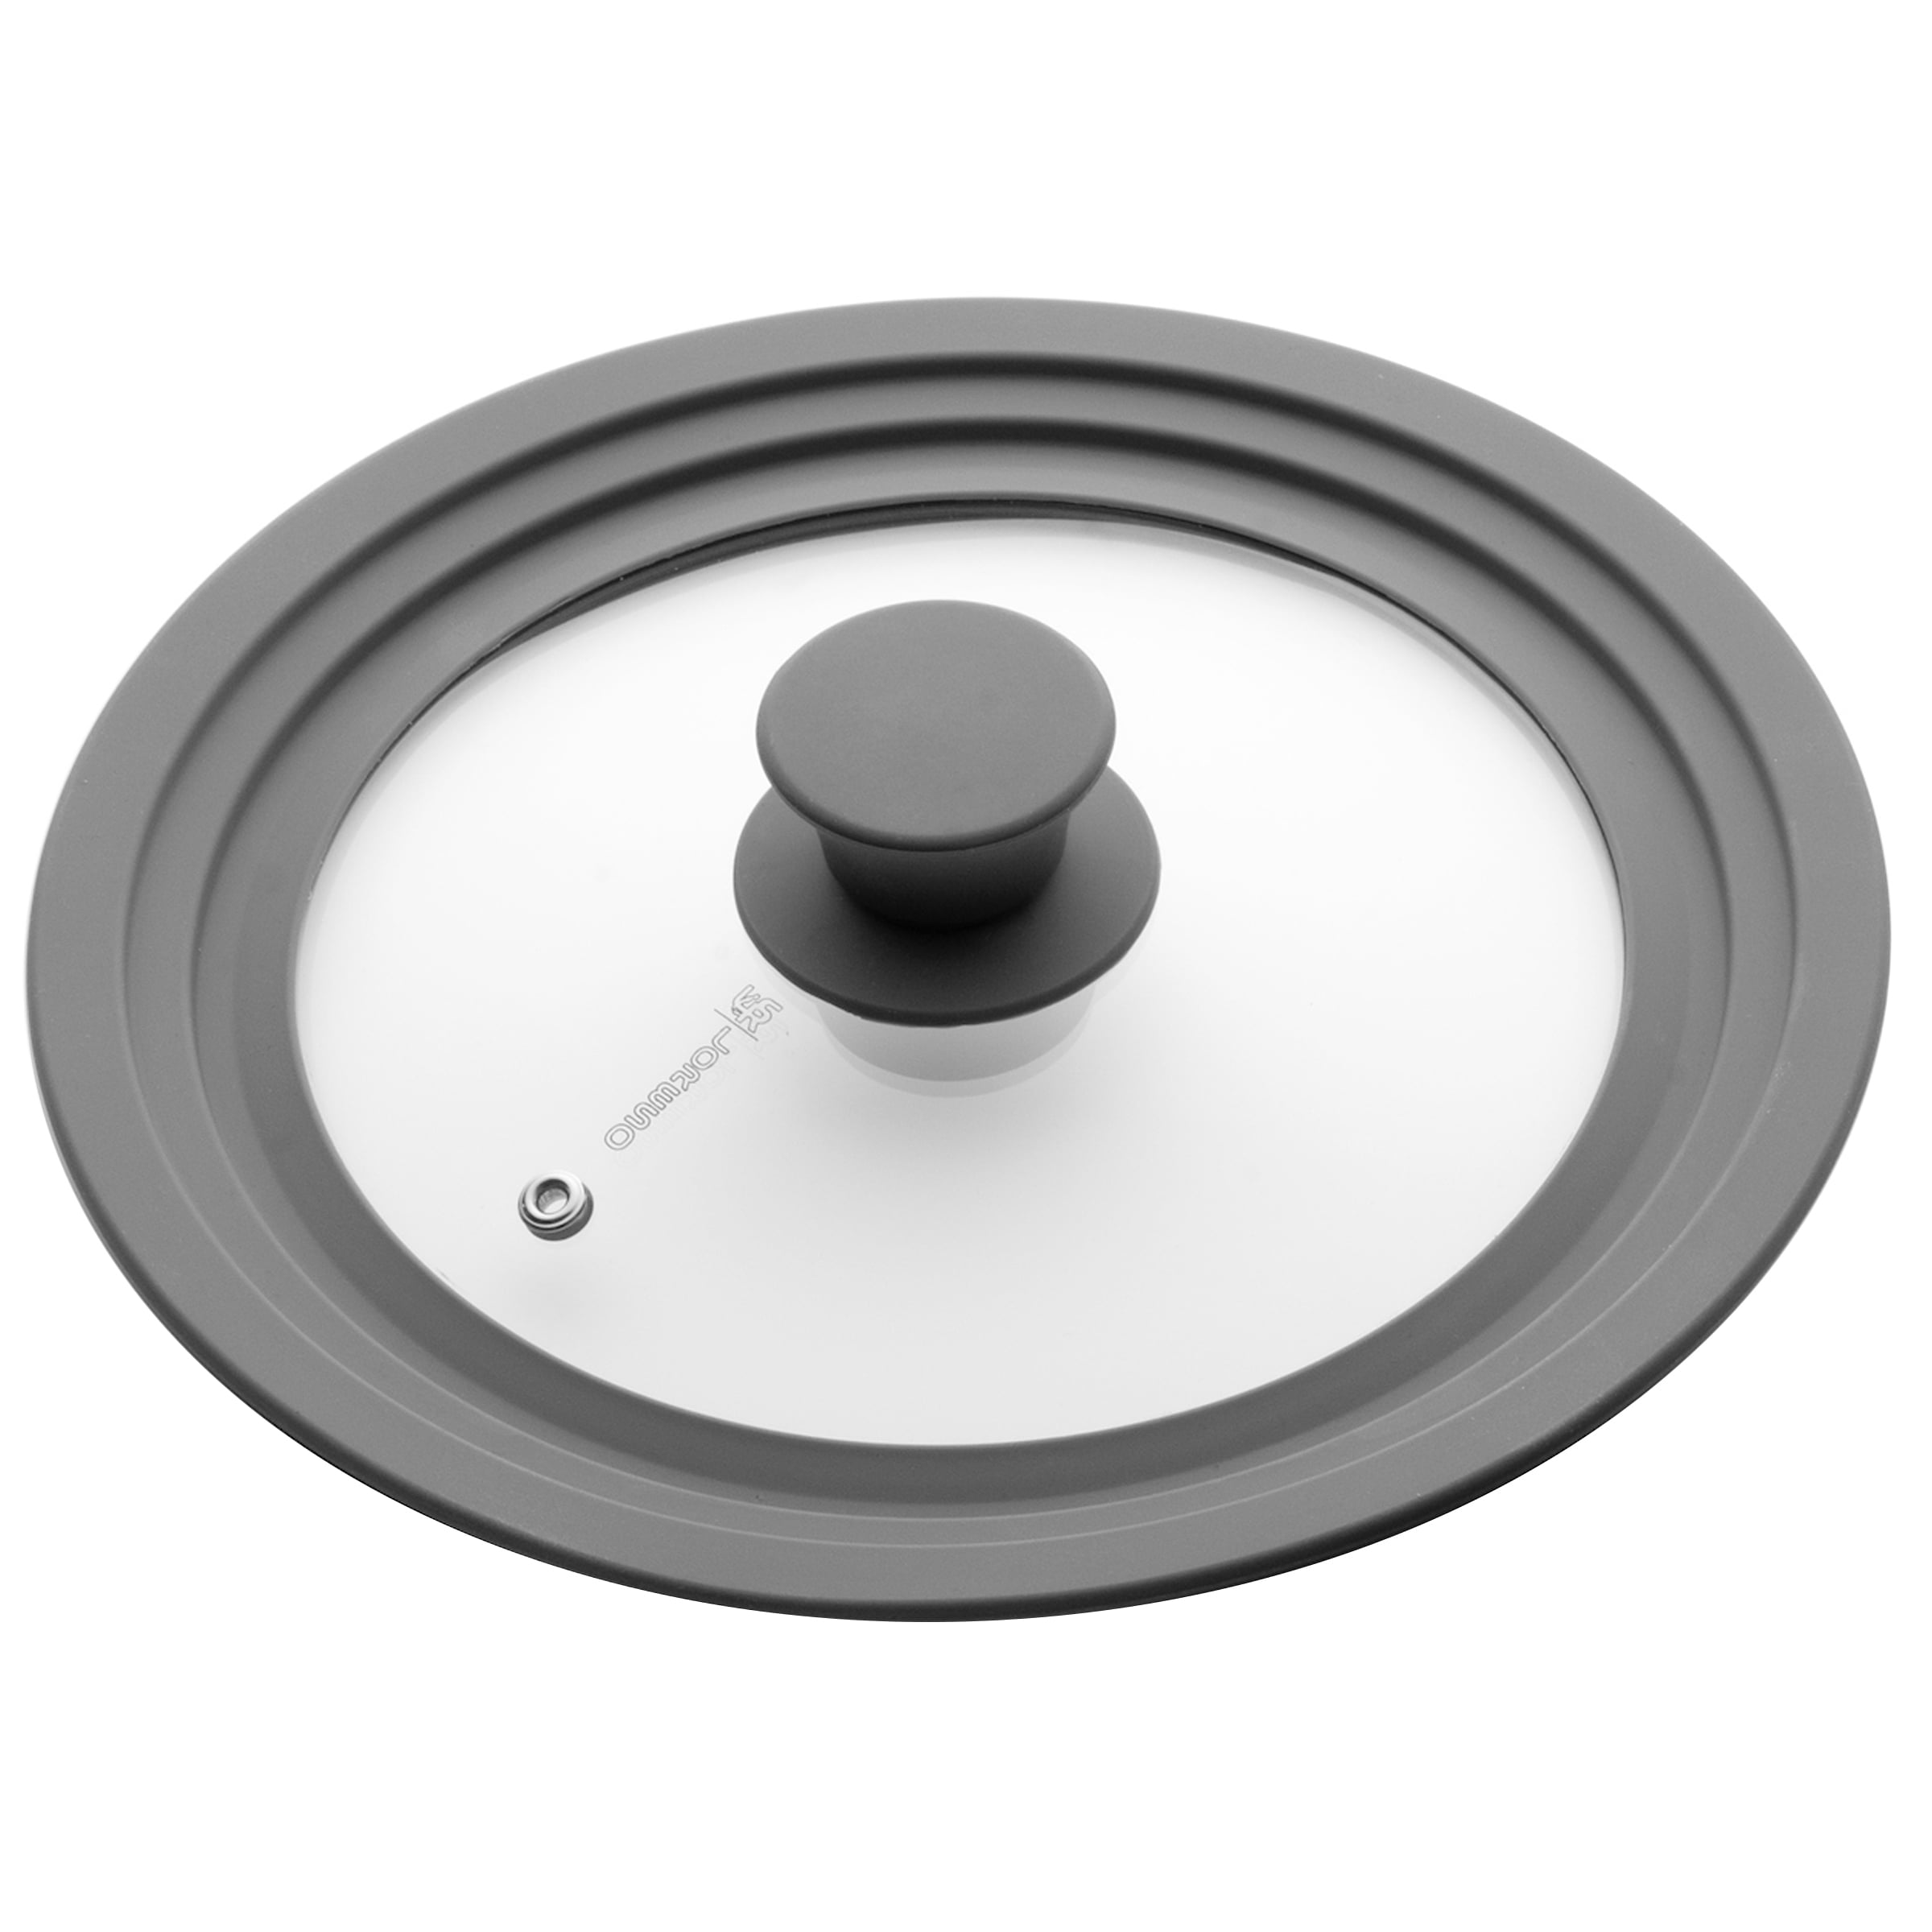 LORESO Silicone Glass Lid Grey - Universal Silicone Glass Lid for